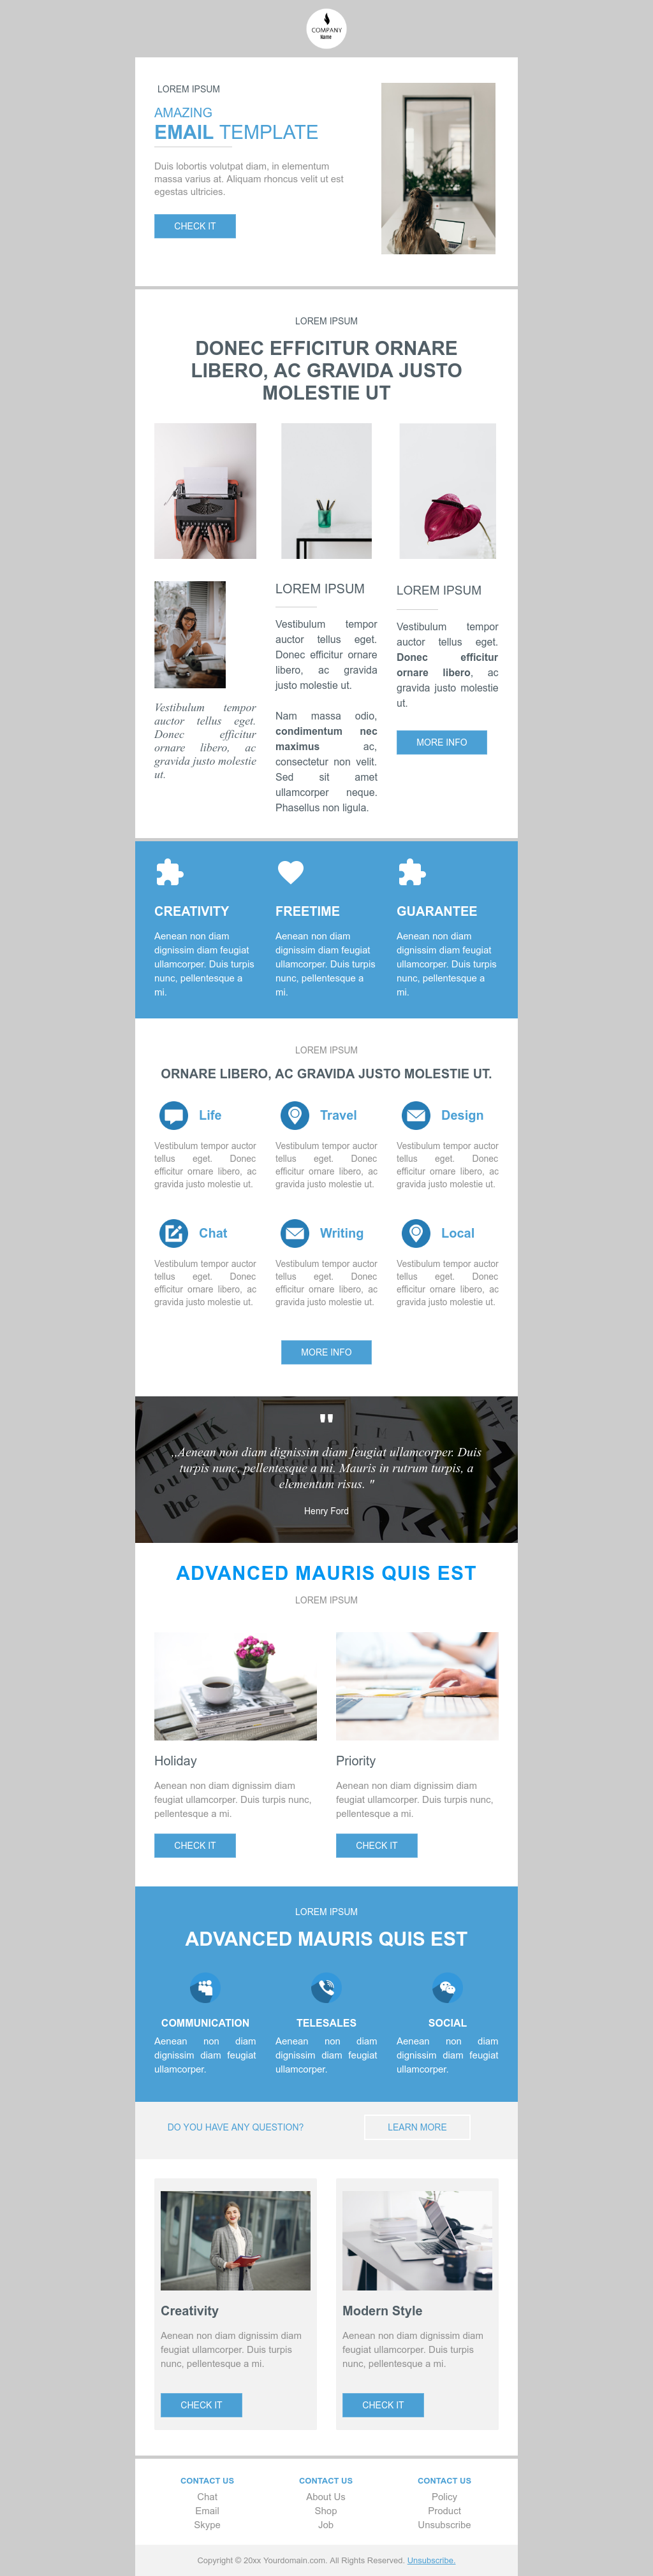 Email newsletter templates